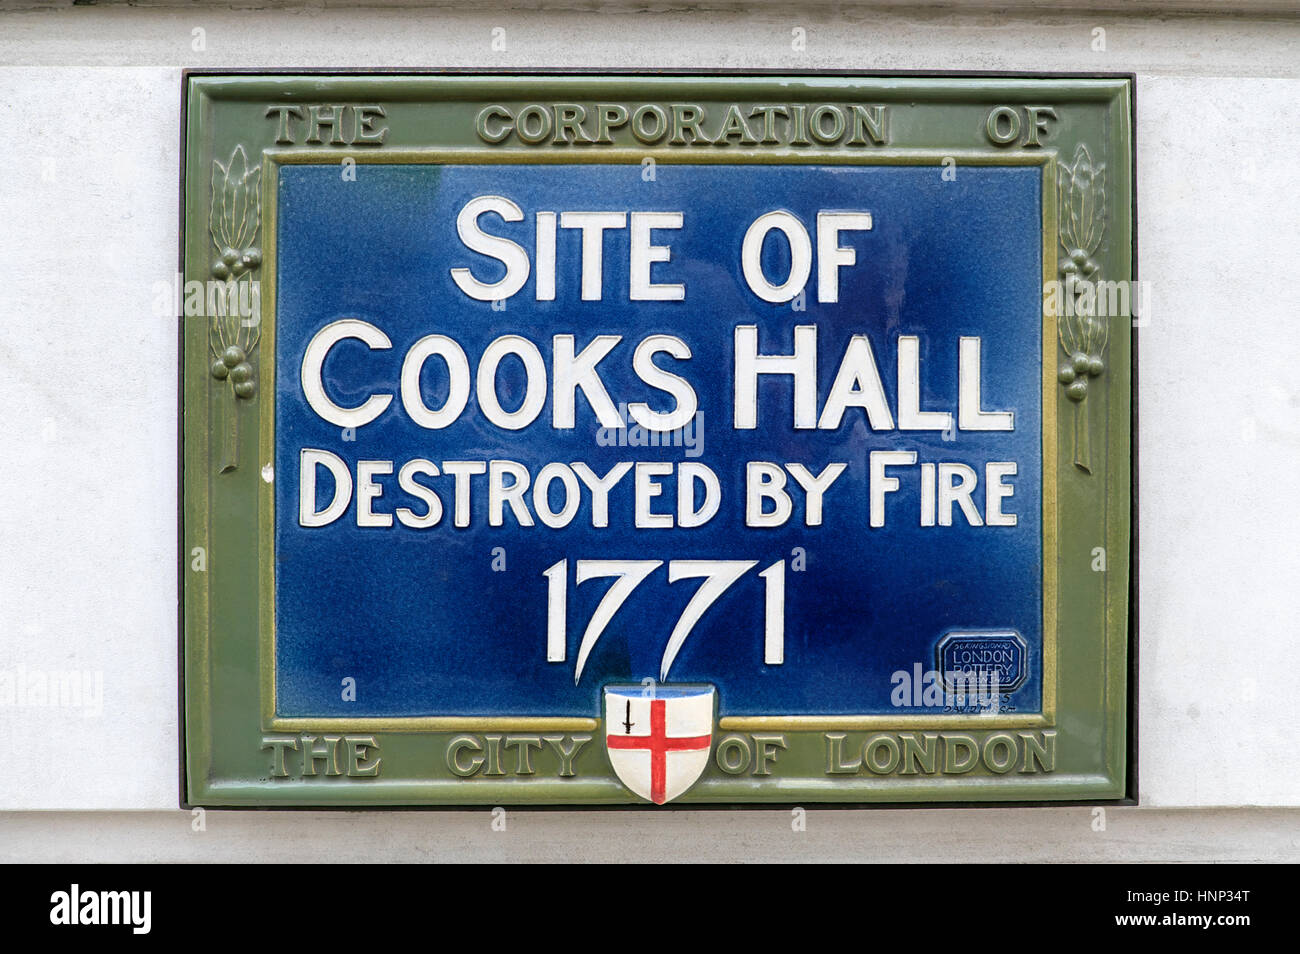 'Site of Cooks Hall Destroyed by Fire 1771'  fire of London memorial blue plaque plaques in the City of London England Great Britain UK  KATHY DEWITT Stock Photo